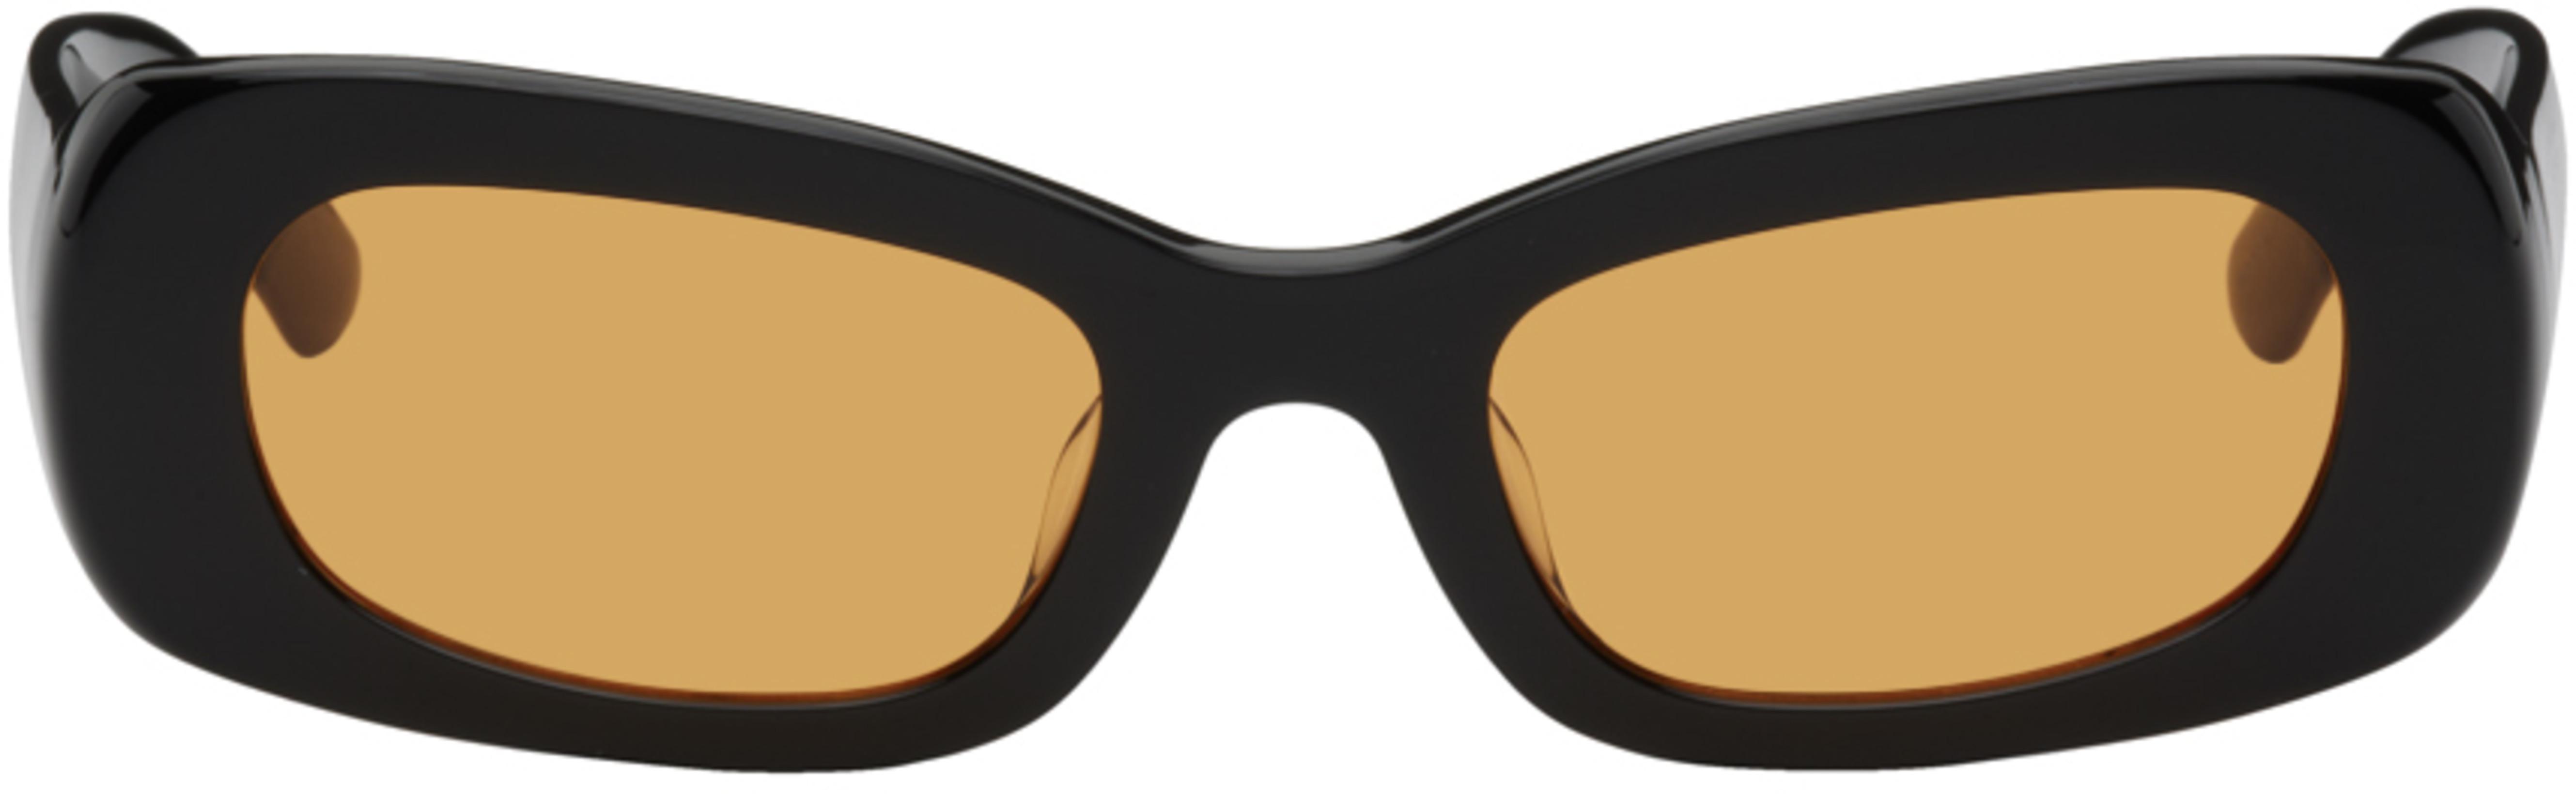 Black UFO Sunglasses by BONNIE CLYDE